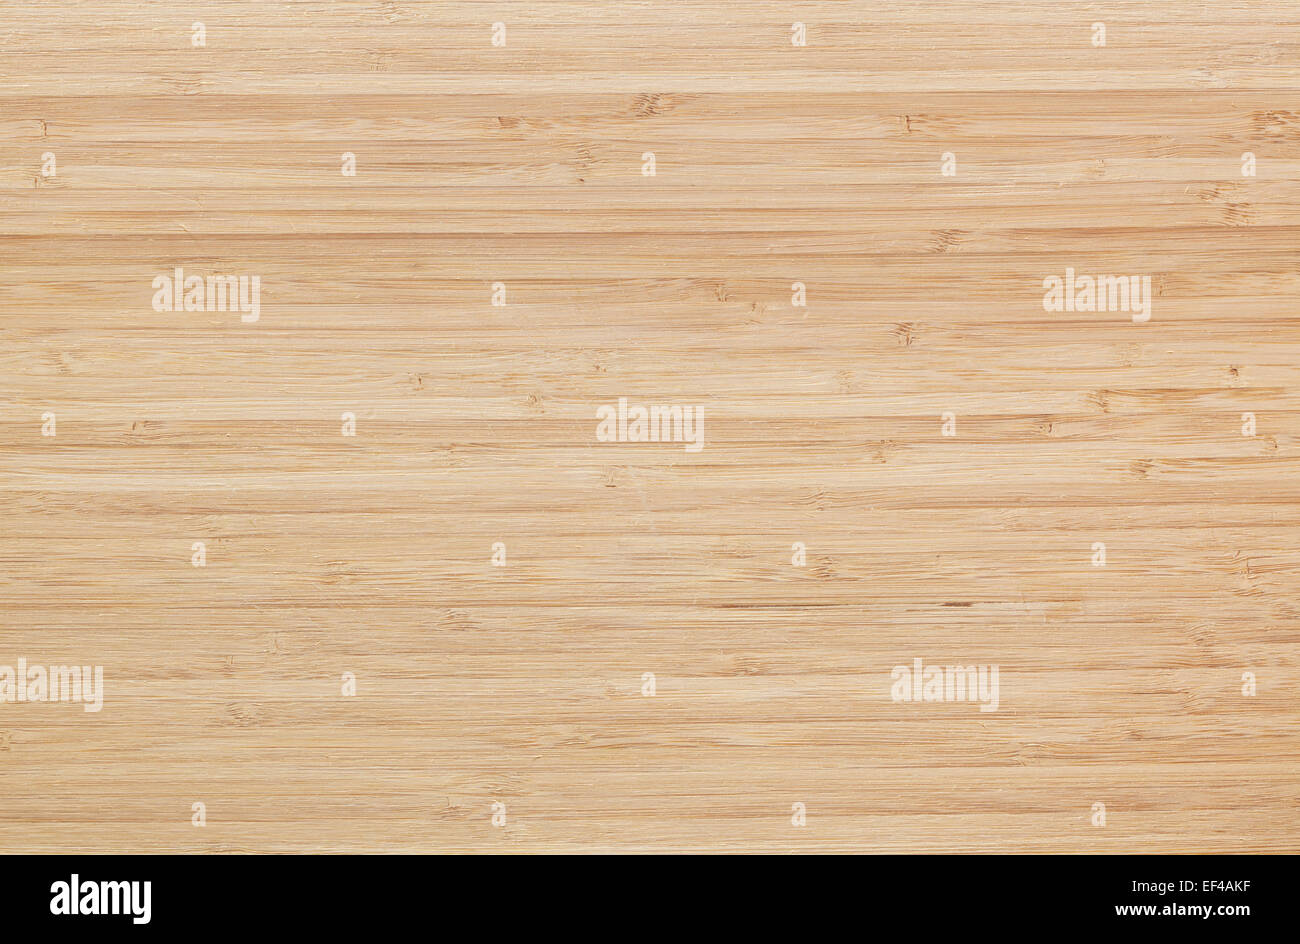 New wooden plank texture or background. Stock Photo